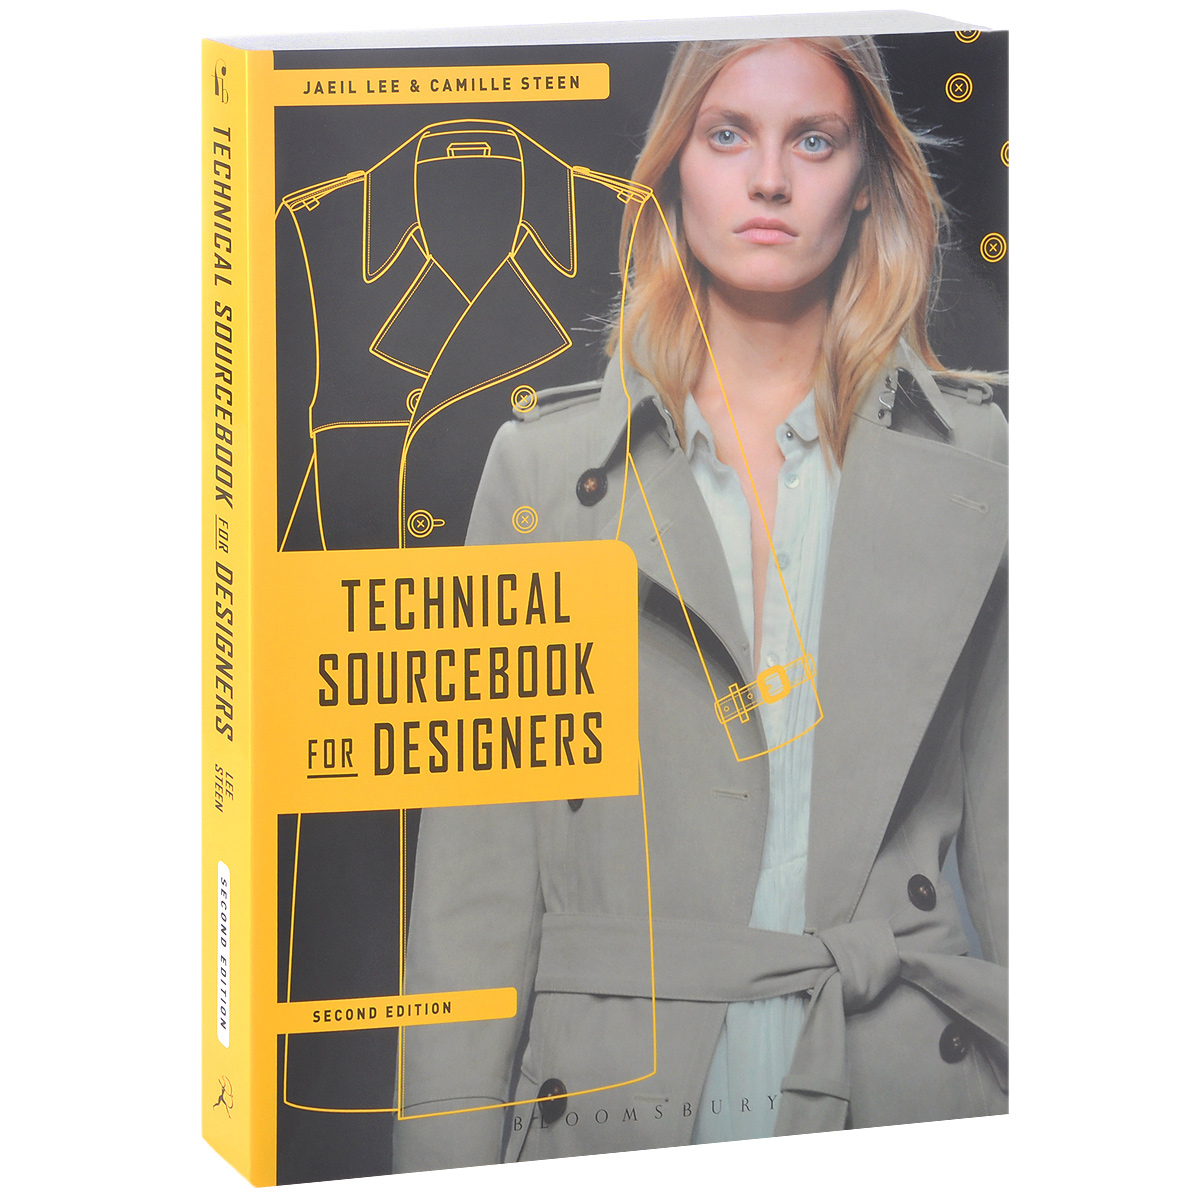 Jaeil Lee & Camille Steen - «Technical Sourcebook for Designers»